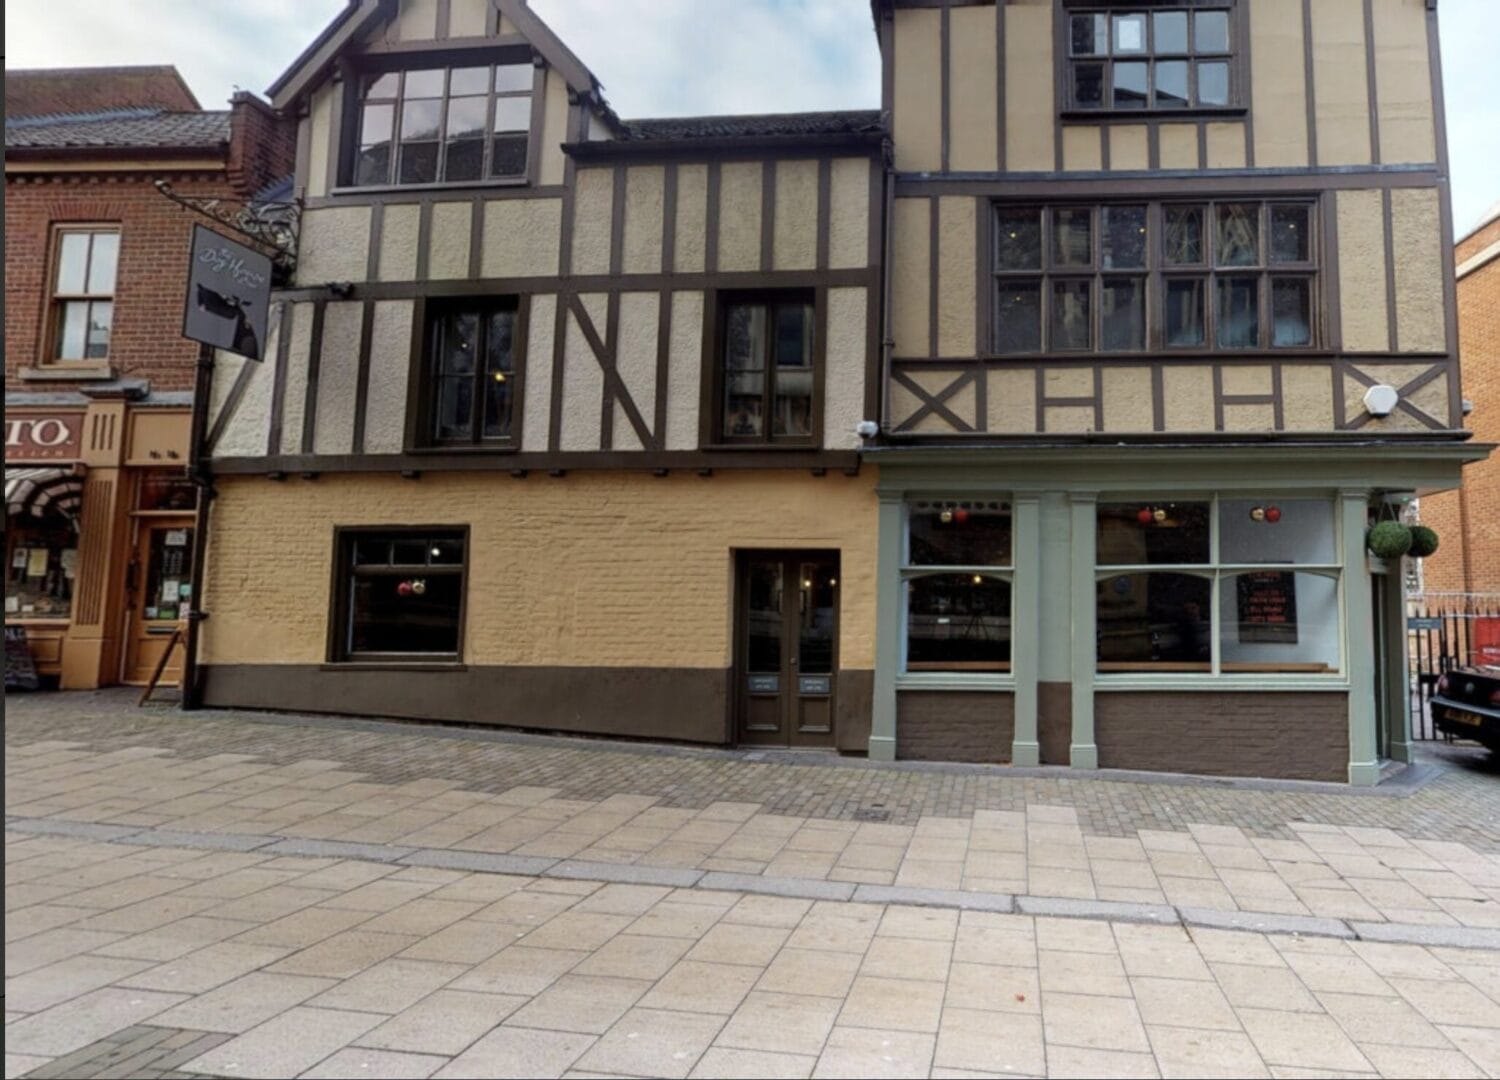 Pubs To Let In Norwich – The Dog House Is Available !